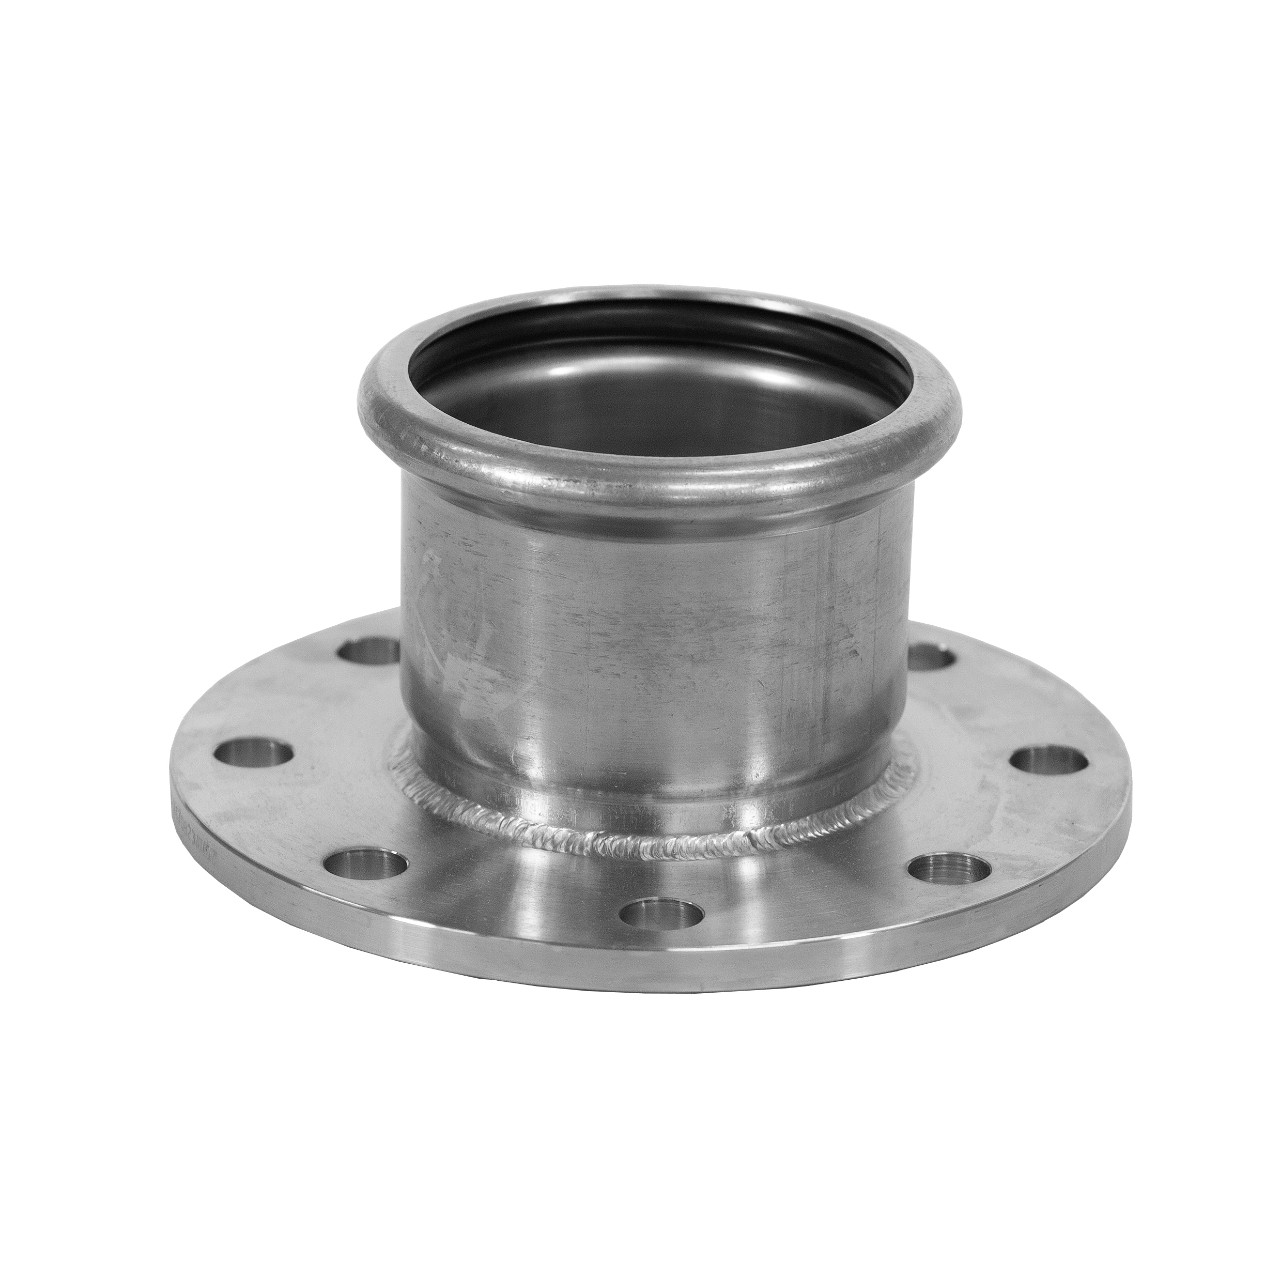 EUROPRESS 316L Stainless Steel Adaptor Flange - Table E